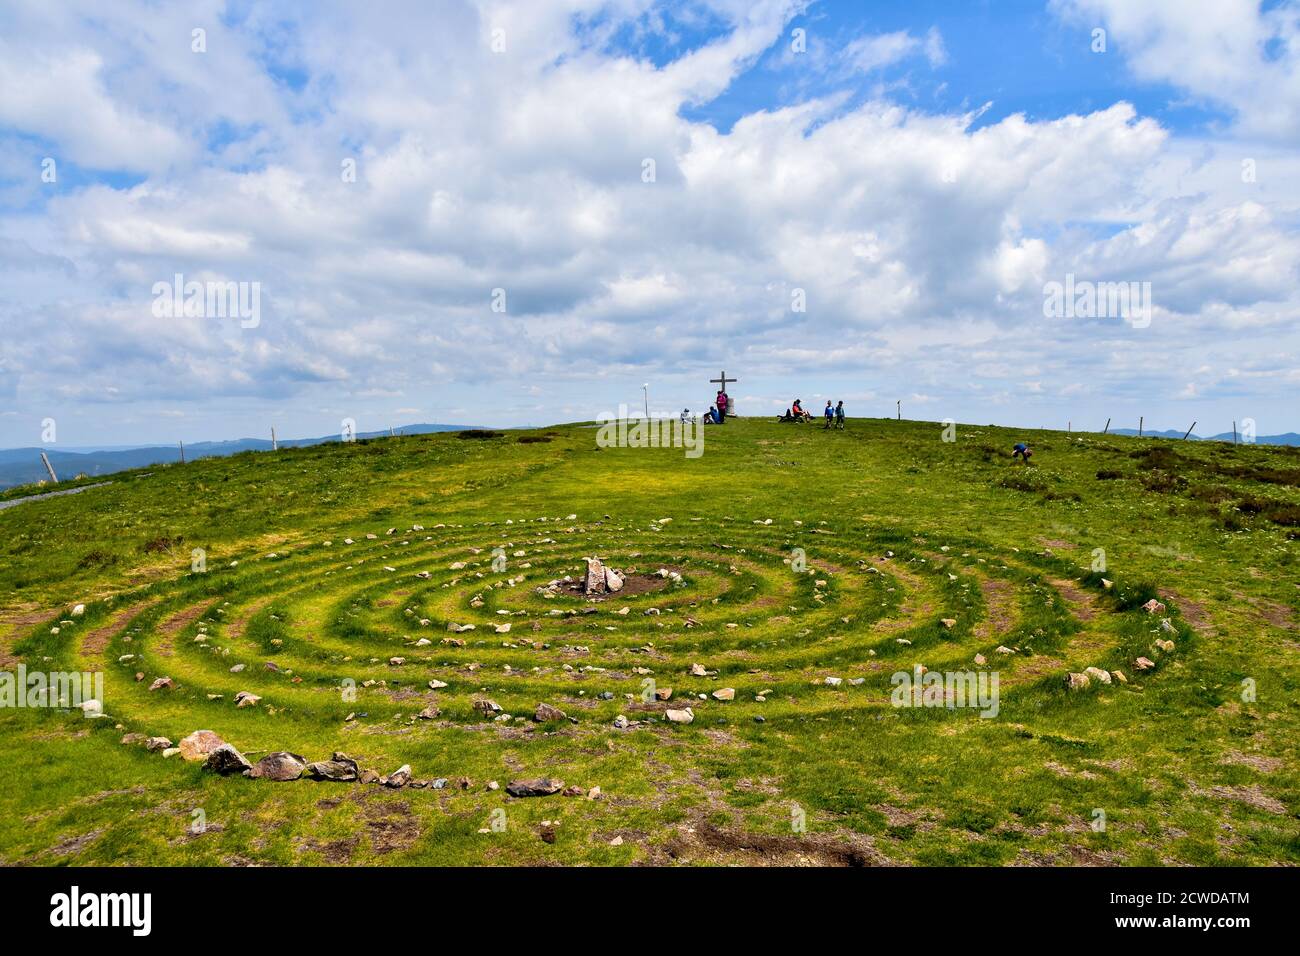 Magic Celtic spiral of life made of rocks in nature. Stock Photo